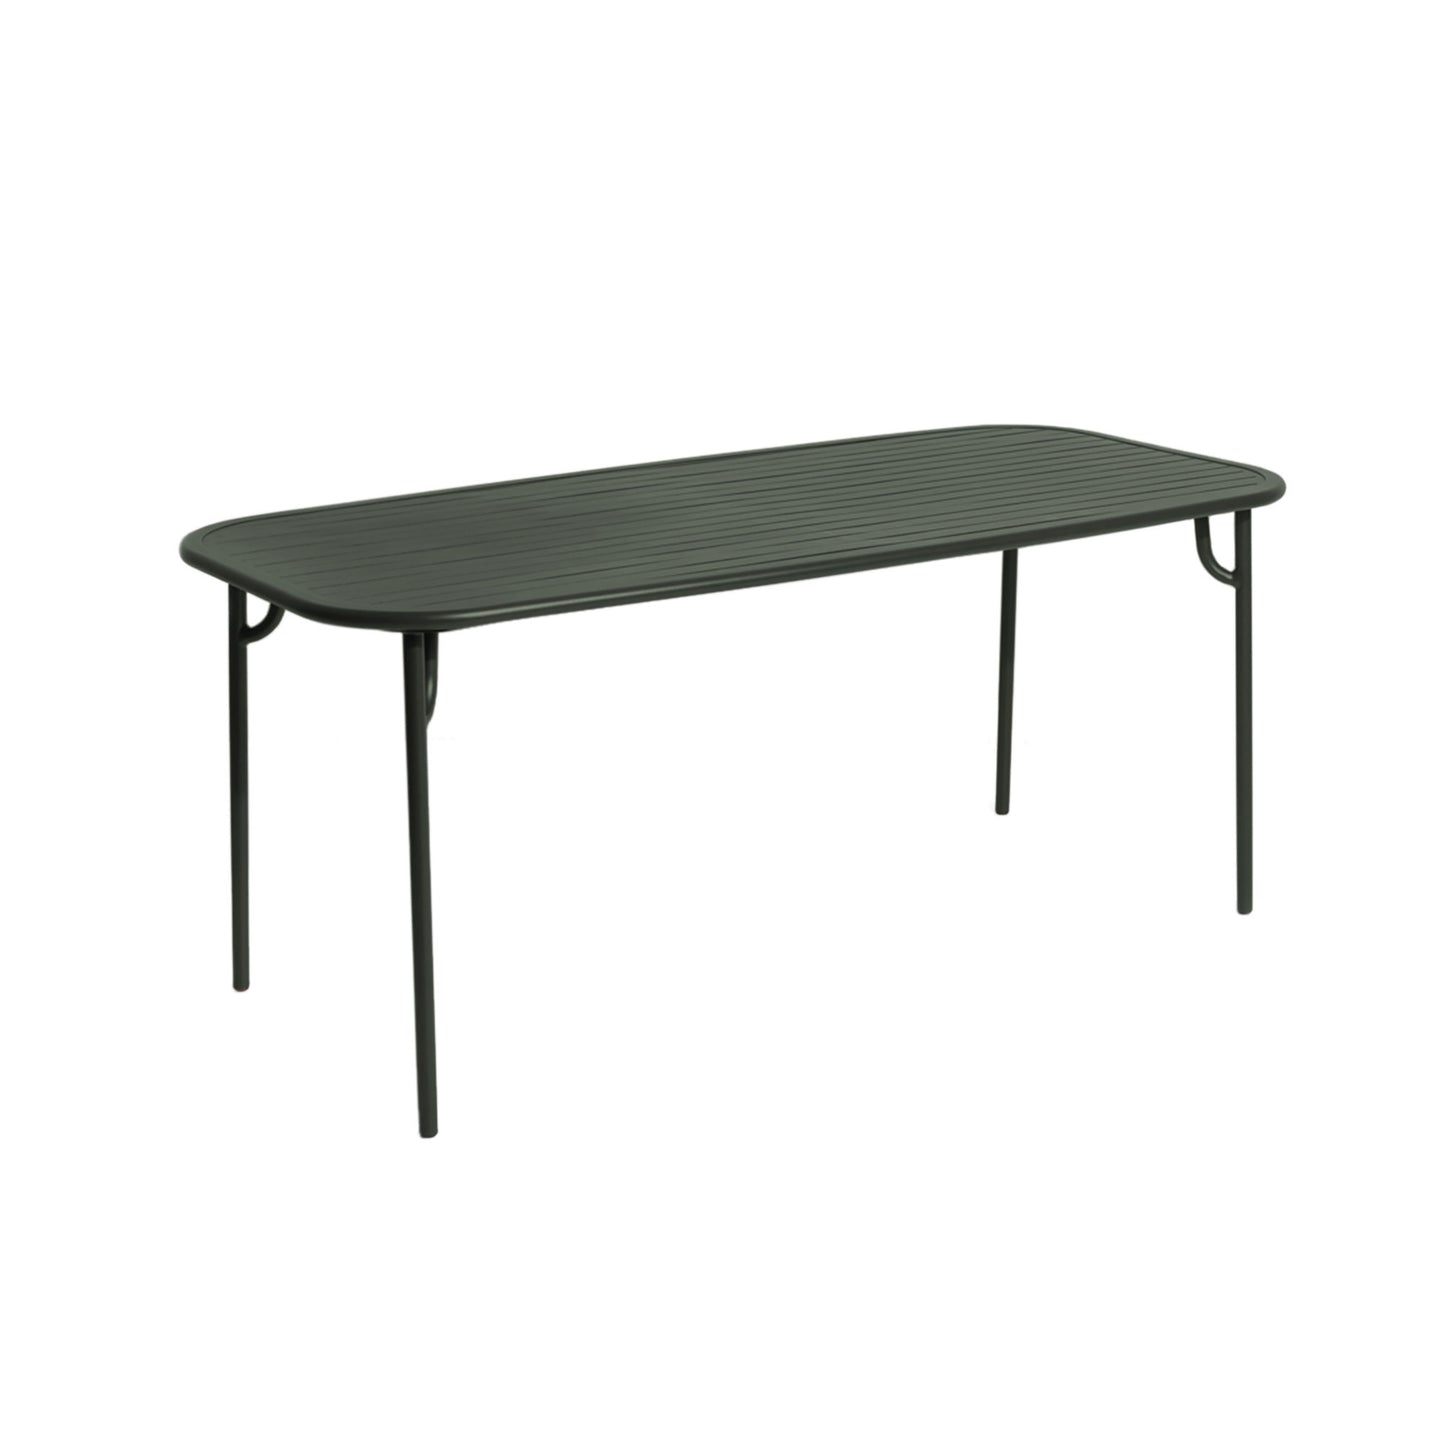 WEEK-END Rectangular Table by Petite Friture #Glass Green